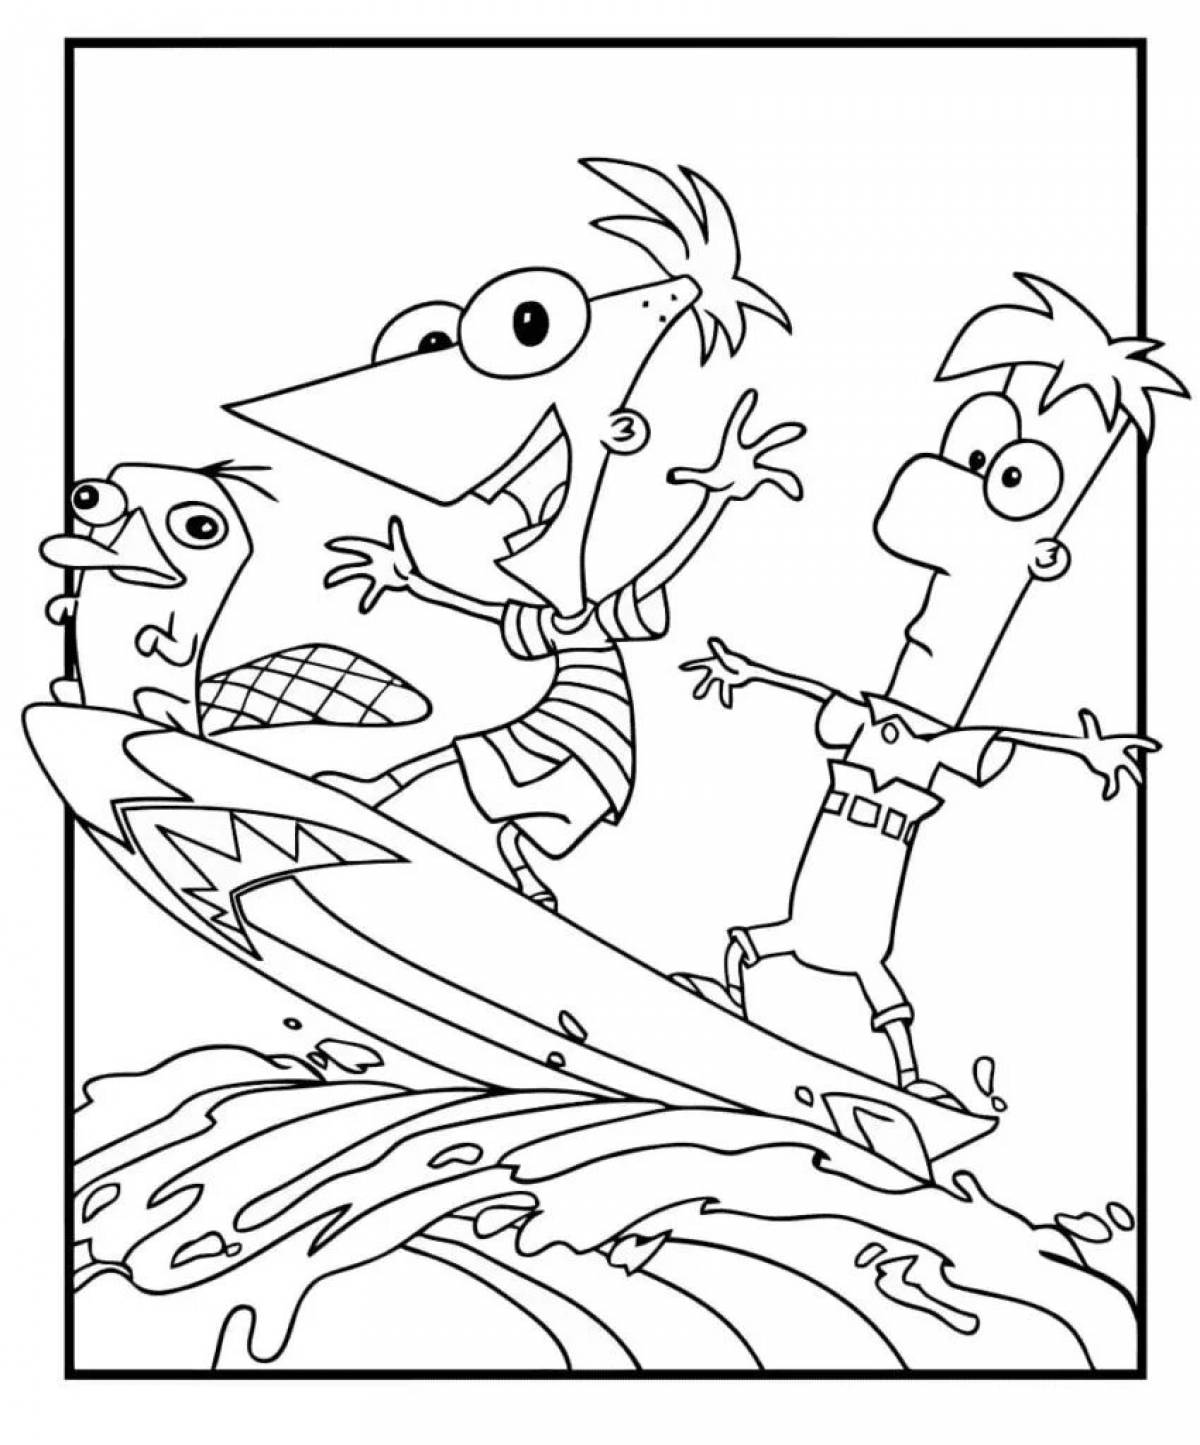 Lucky coloring page - shiny